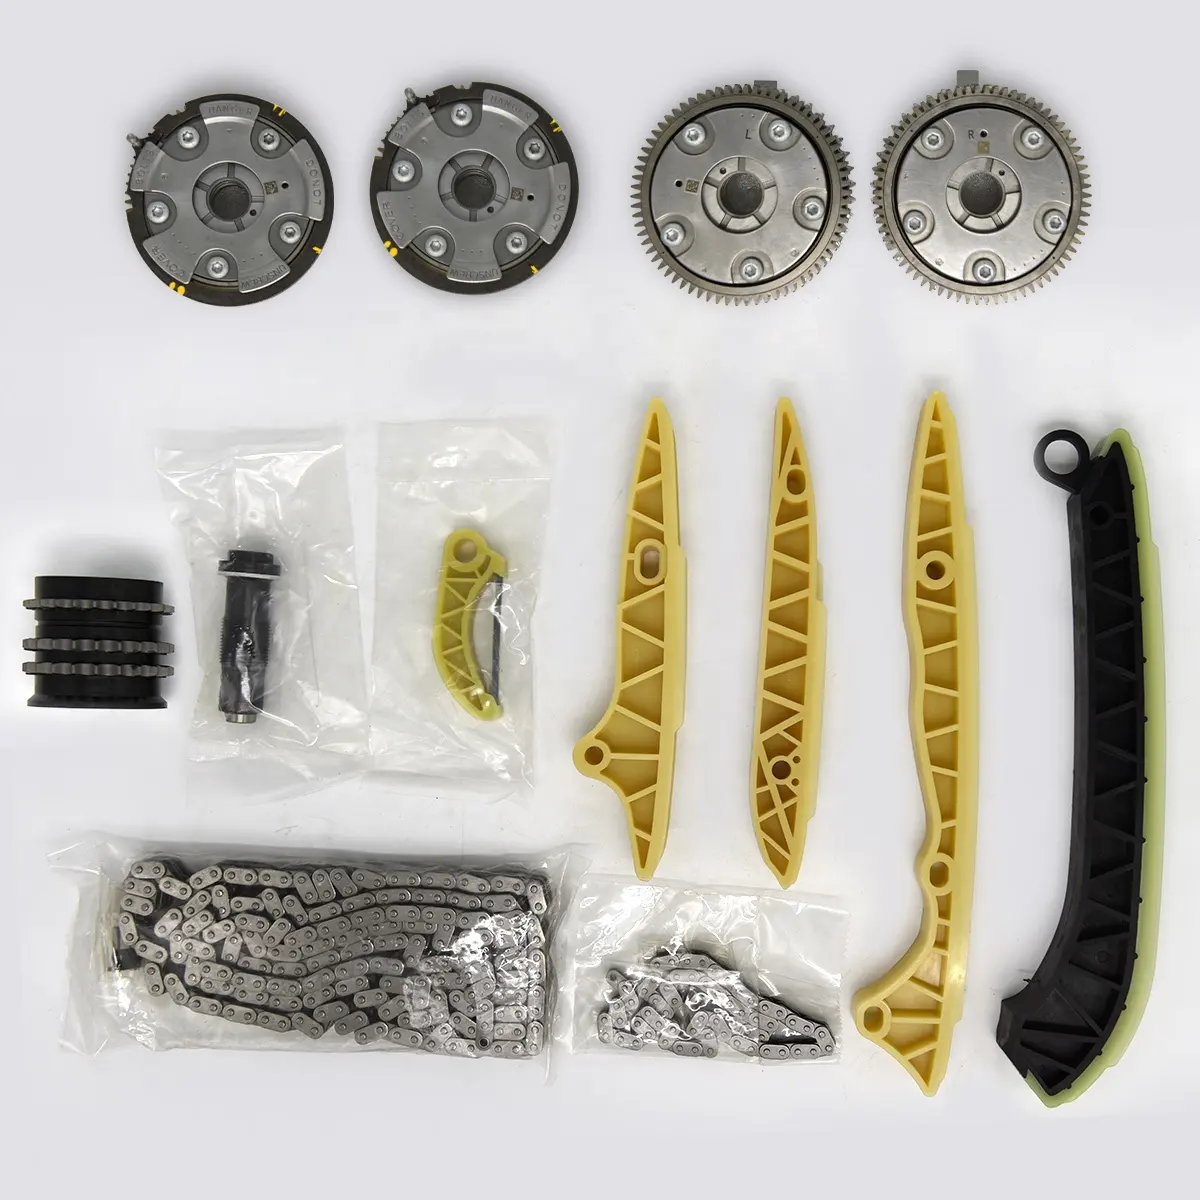 Timing Chain Cam Phaser kit 0009930676 2720505347 2720506847 2720505247 for Mercedes Benz C230 C350 CLS350 E350 R350 3.0L 3.5L